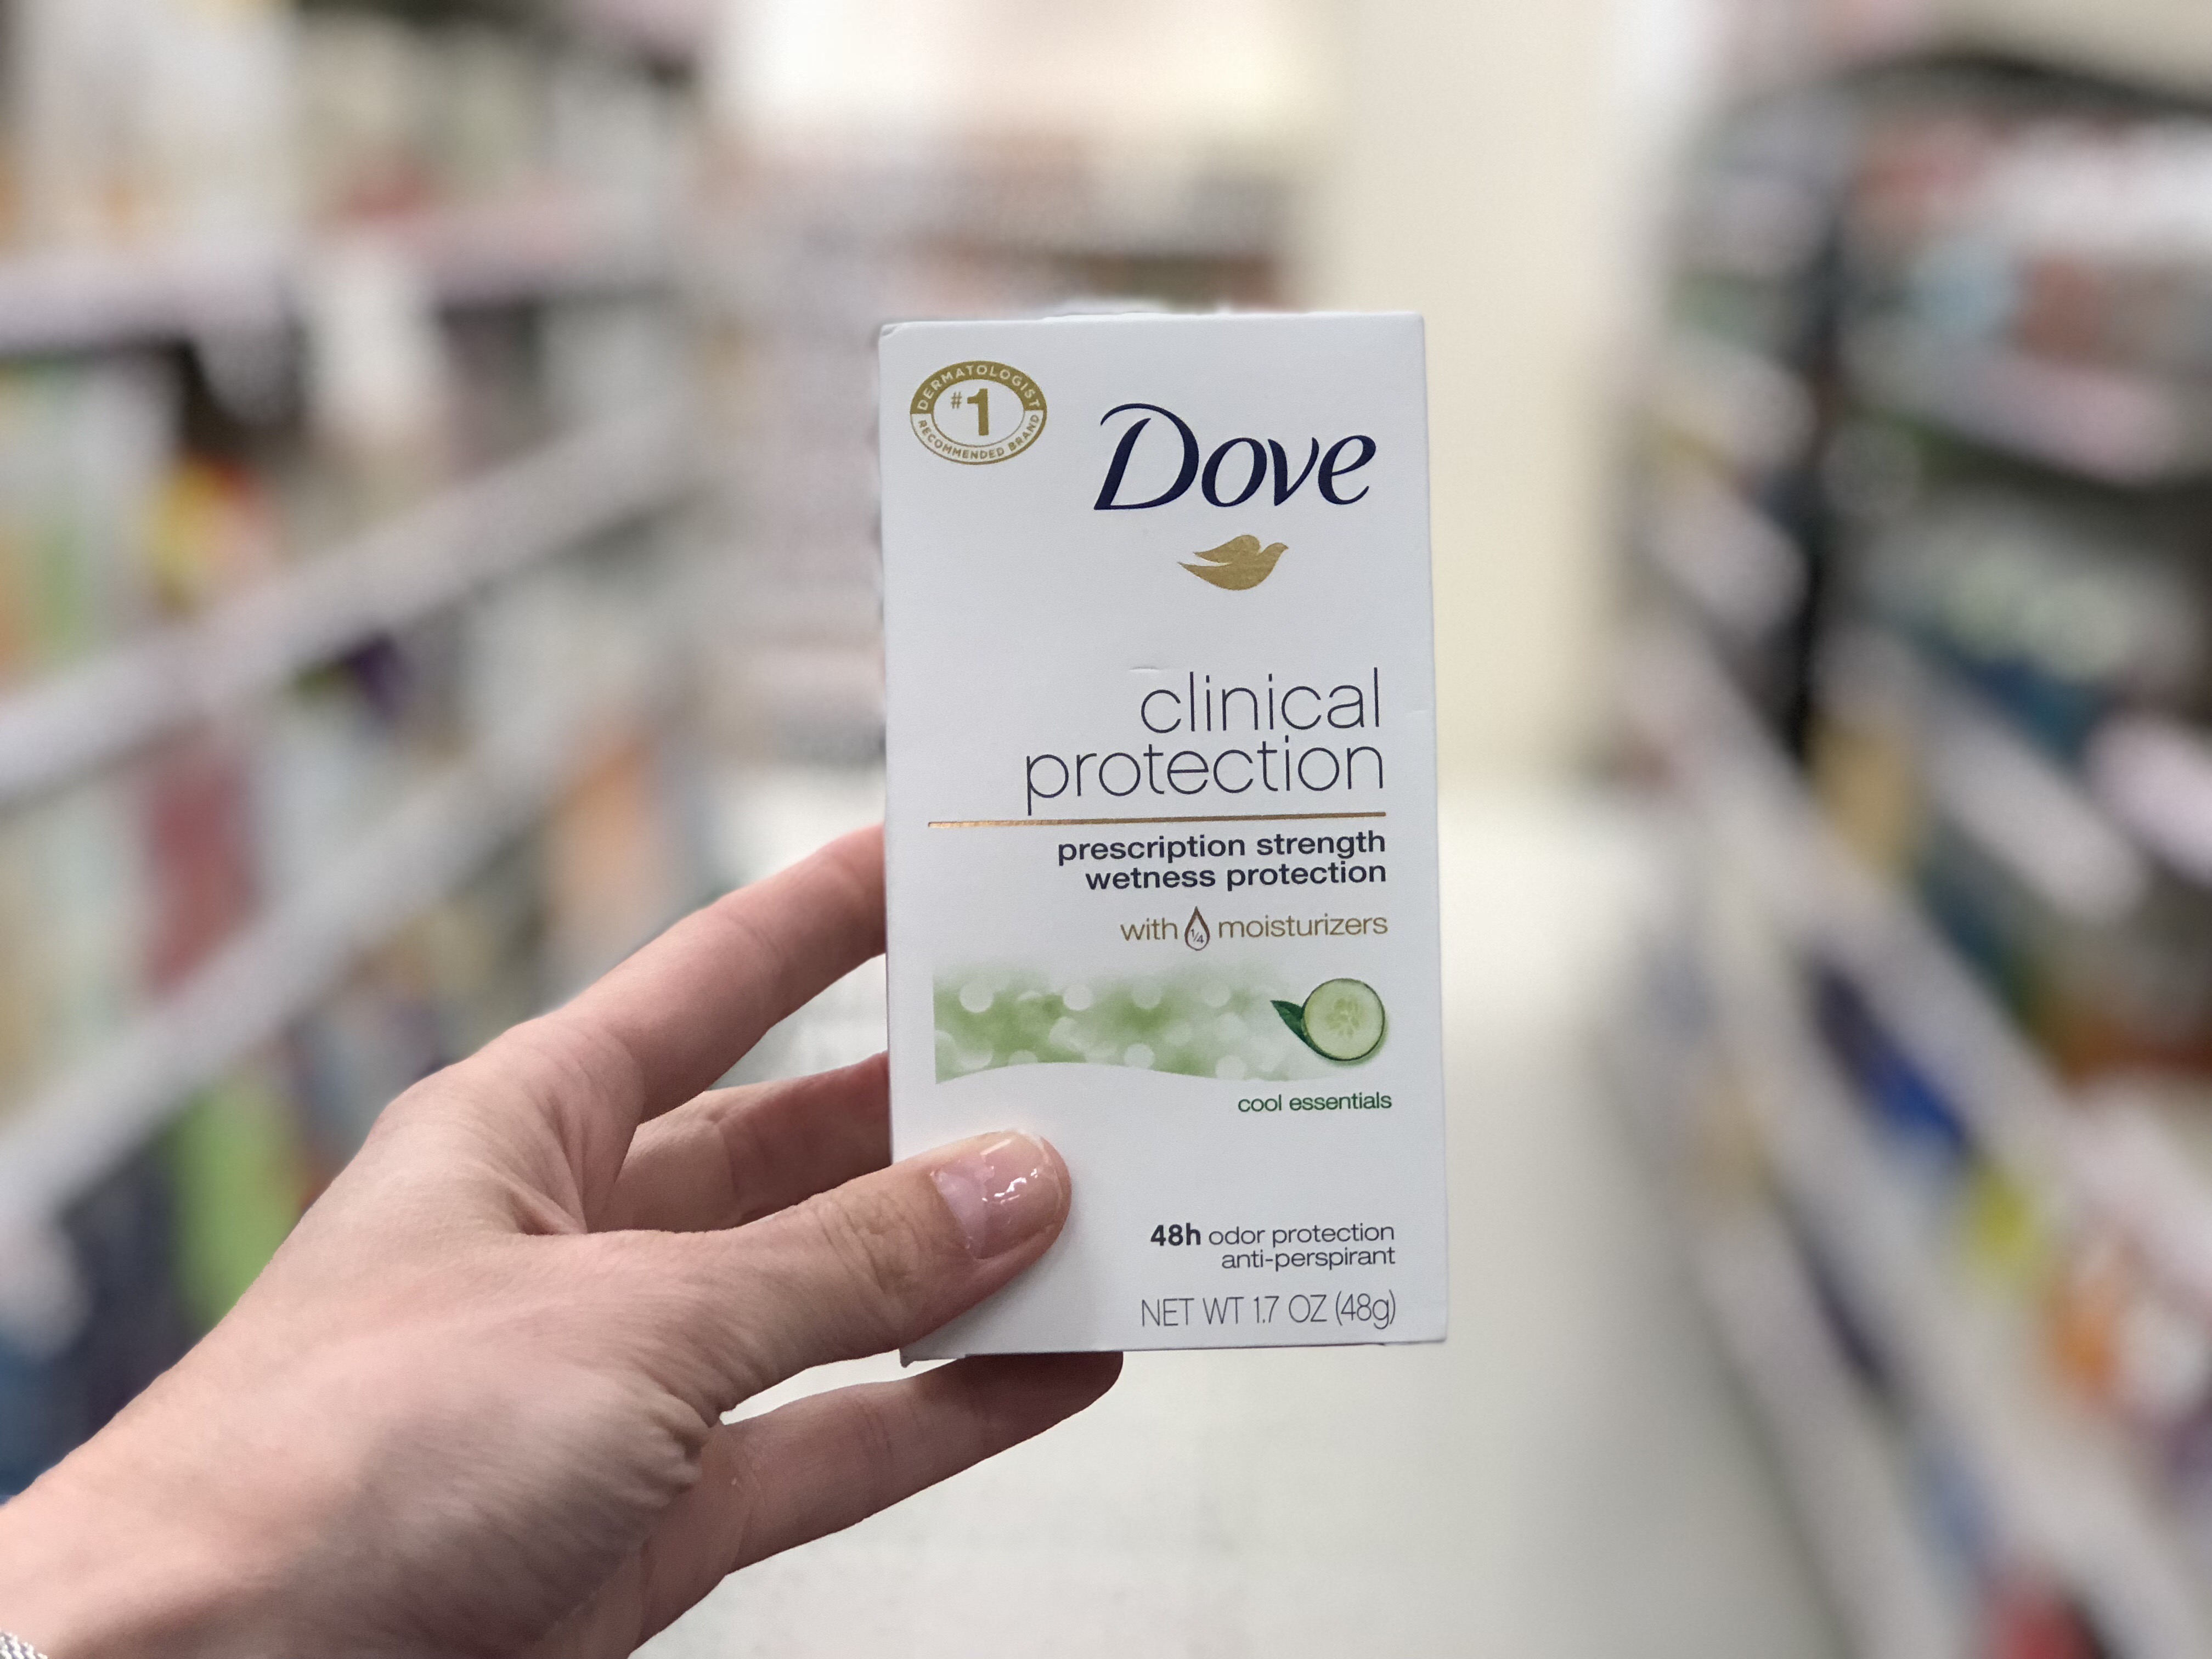 p & g makes it tougher to redeem printable coupons – Dove clinical protection product